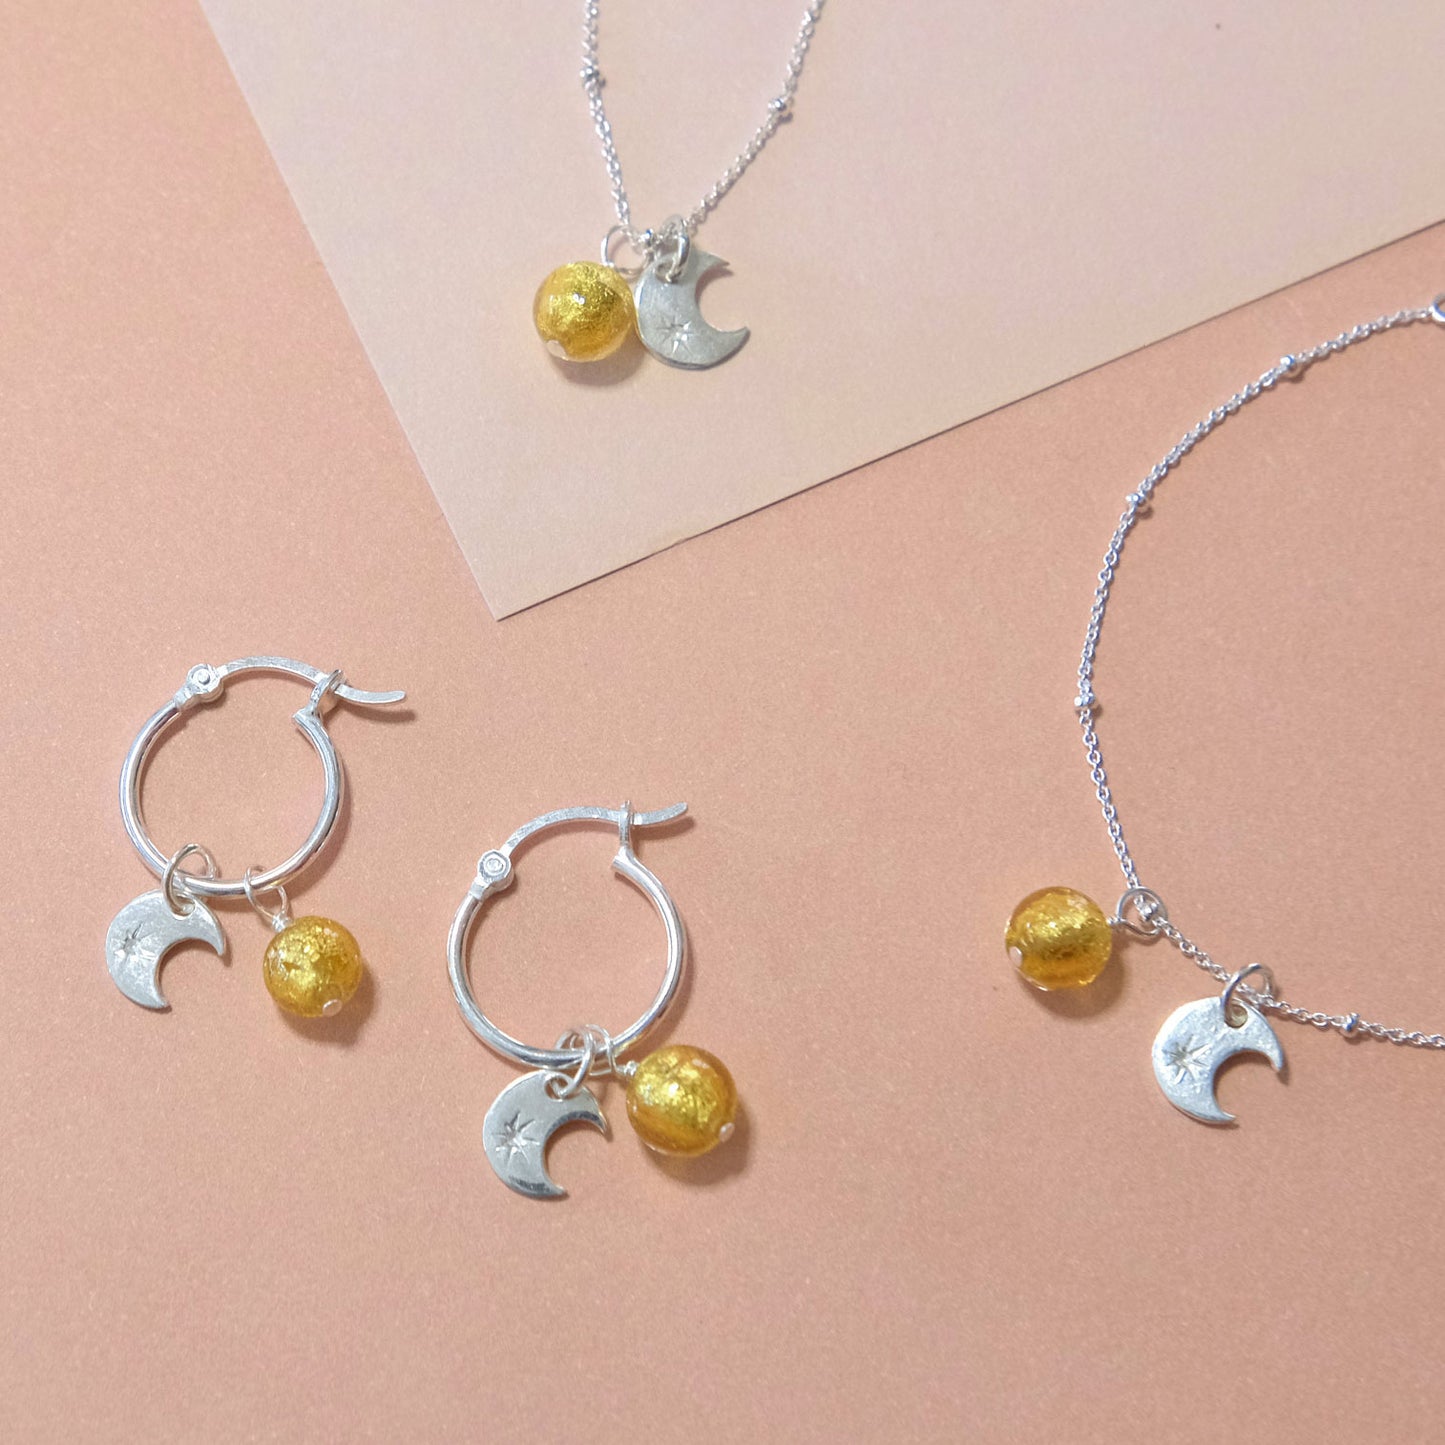 Sun and Moon Bracelet - Sterling Silver